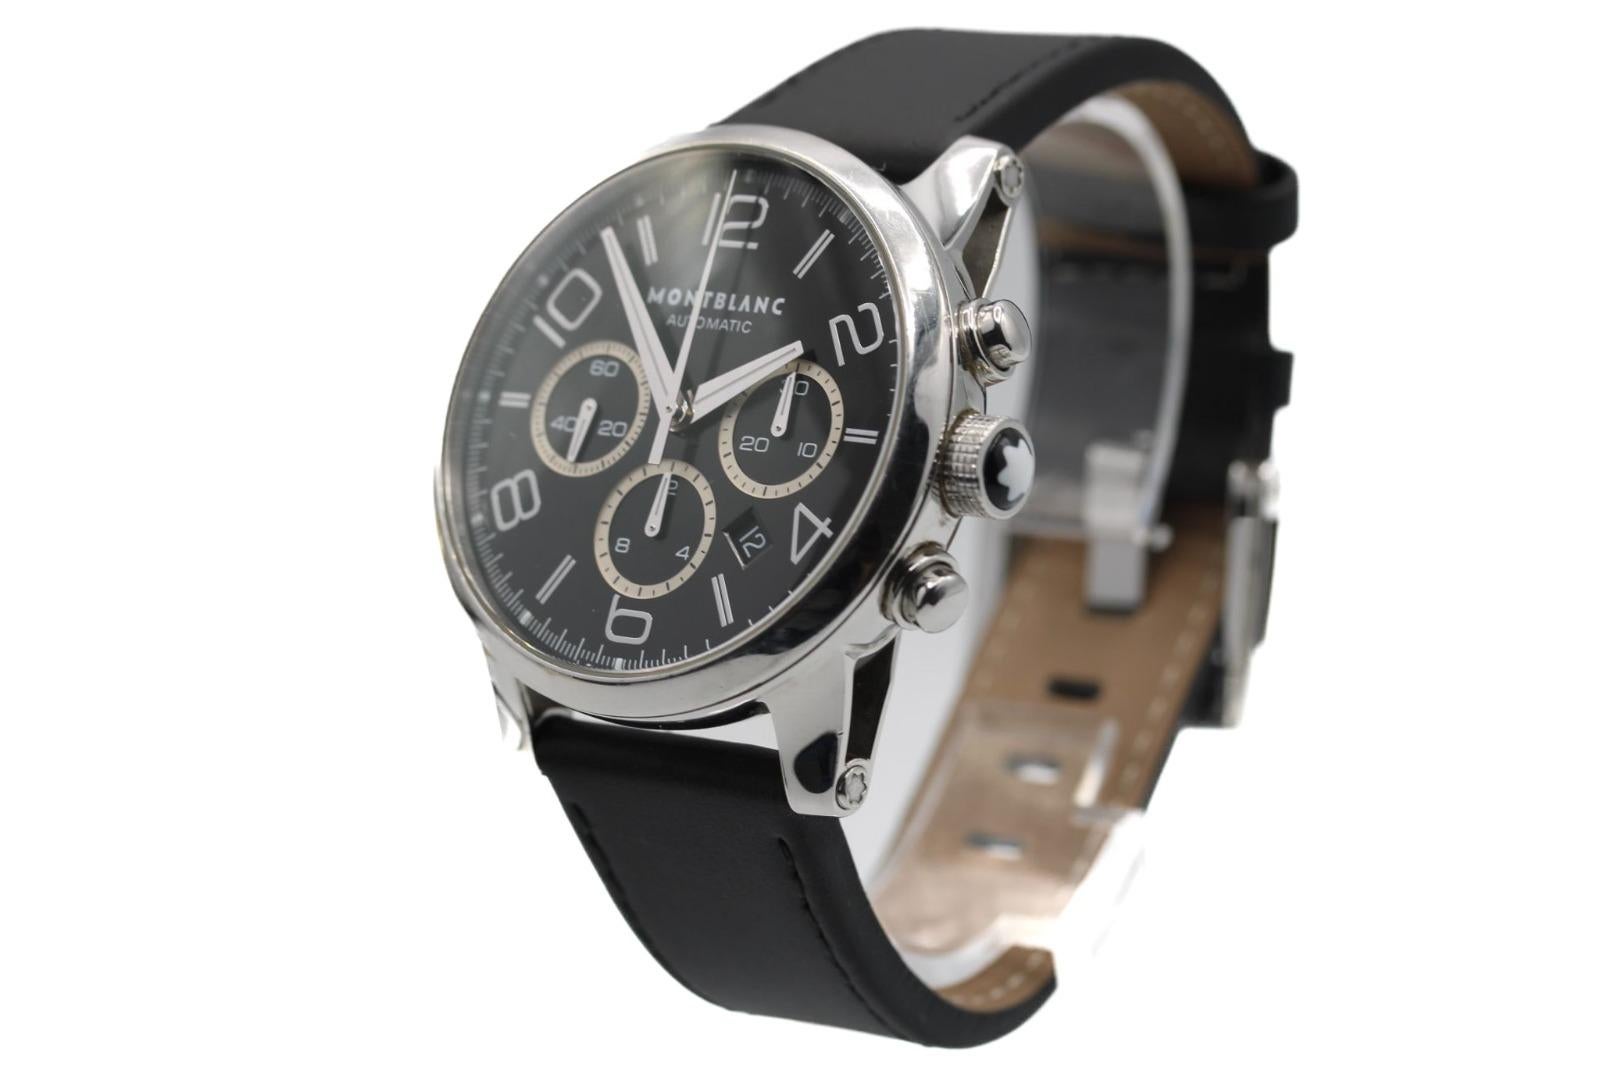 Watch: Montblanc Timewalker Chronograph 36063 Full Set 2007
Stock Number: CHW4836
Price: £1,995

Just arrived in stock and from what we have seen so far, it is presented in perfect working order with what we would say very limited use since being